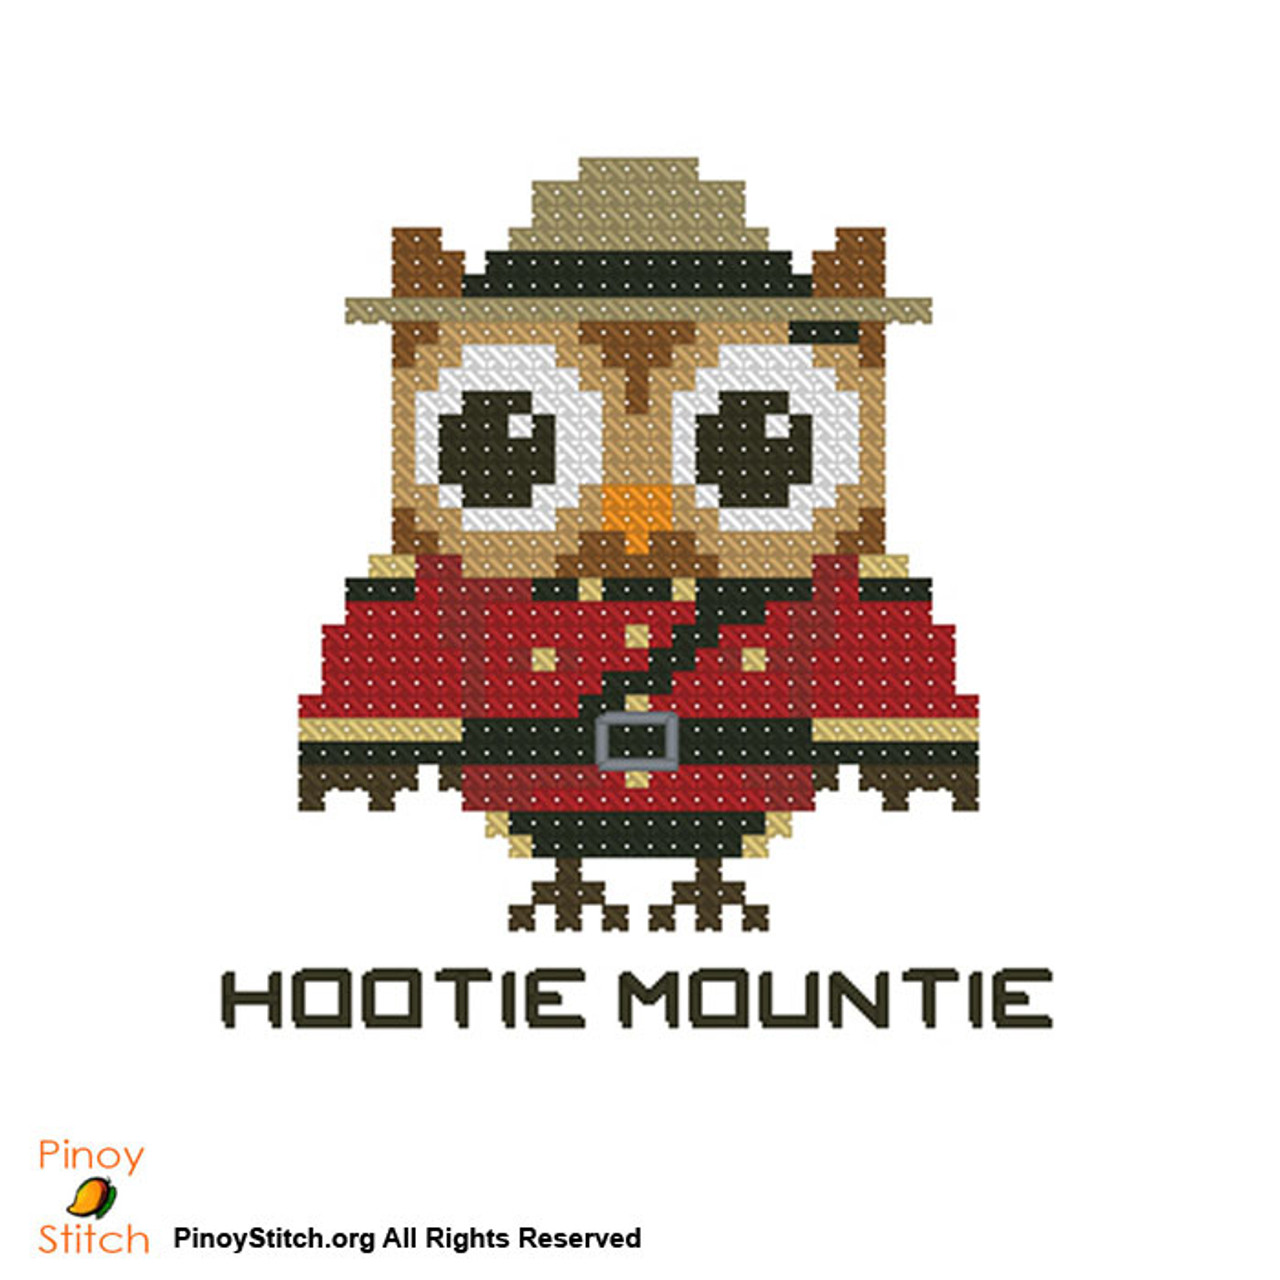 Hootie Mountie (Canadian Mounted Police)